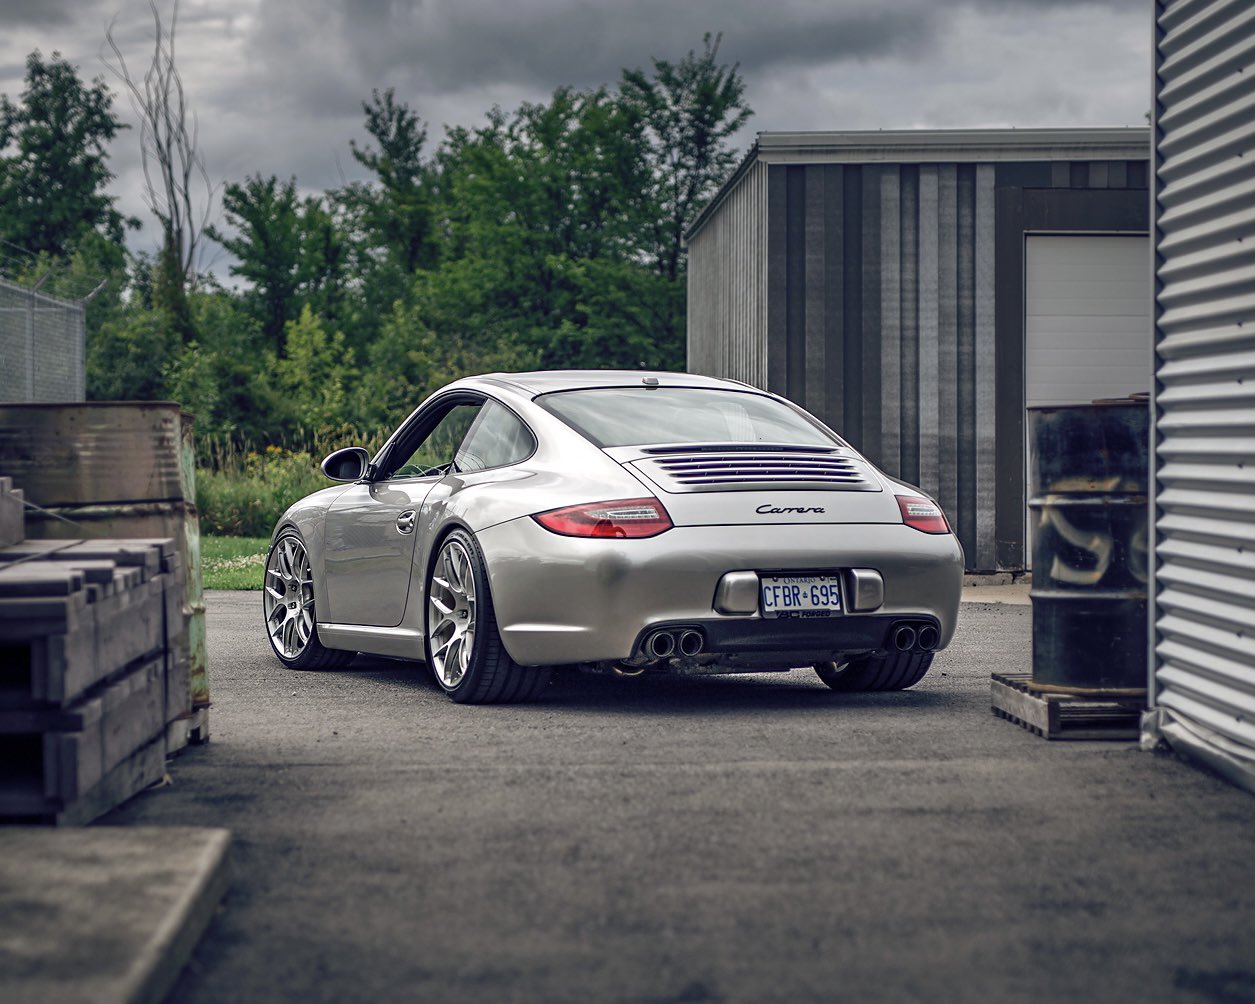 BC Racing NA on X: "The BC Porsche 997.2 Carrera package! Suspension •  @bcracingna #BRseries Custom Coilovers. Wheels • @bcforgedna 19” KL12 in  Brushed clear • @911obsessed • #bcracingna #bcracing #bcforgedna #bcforged #